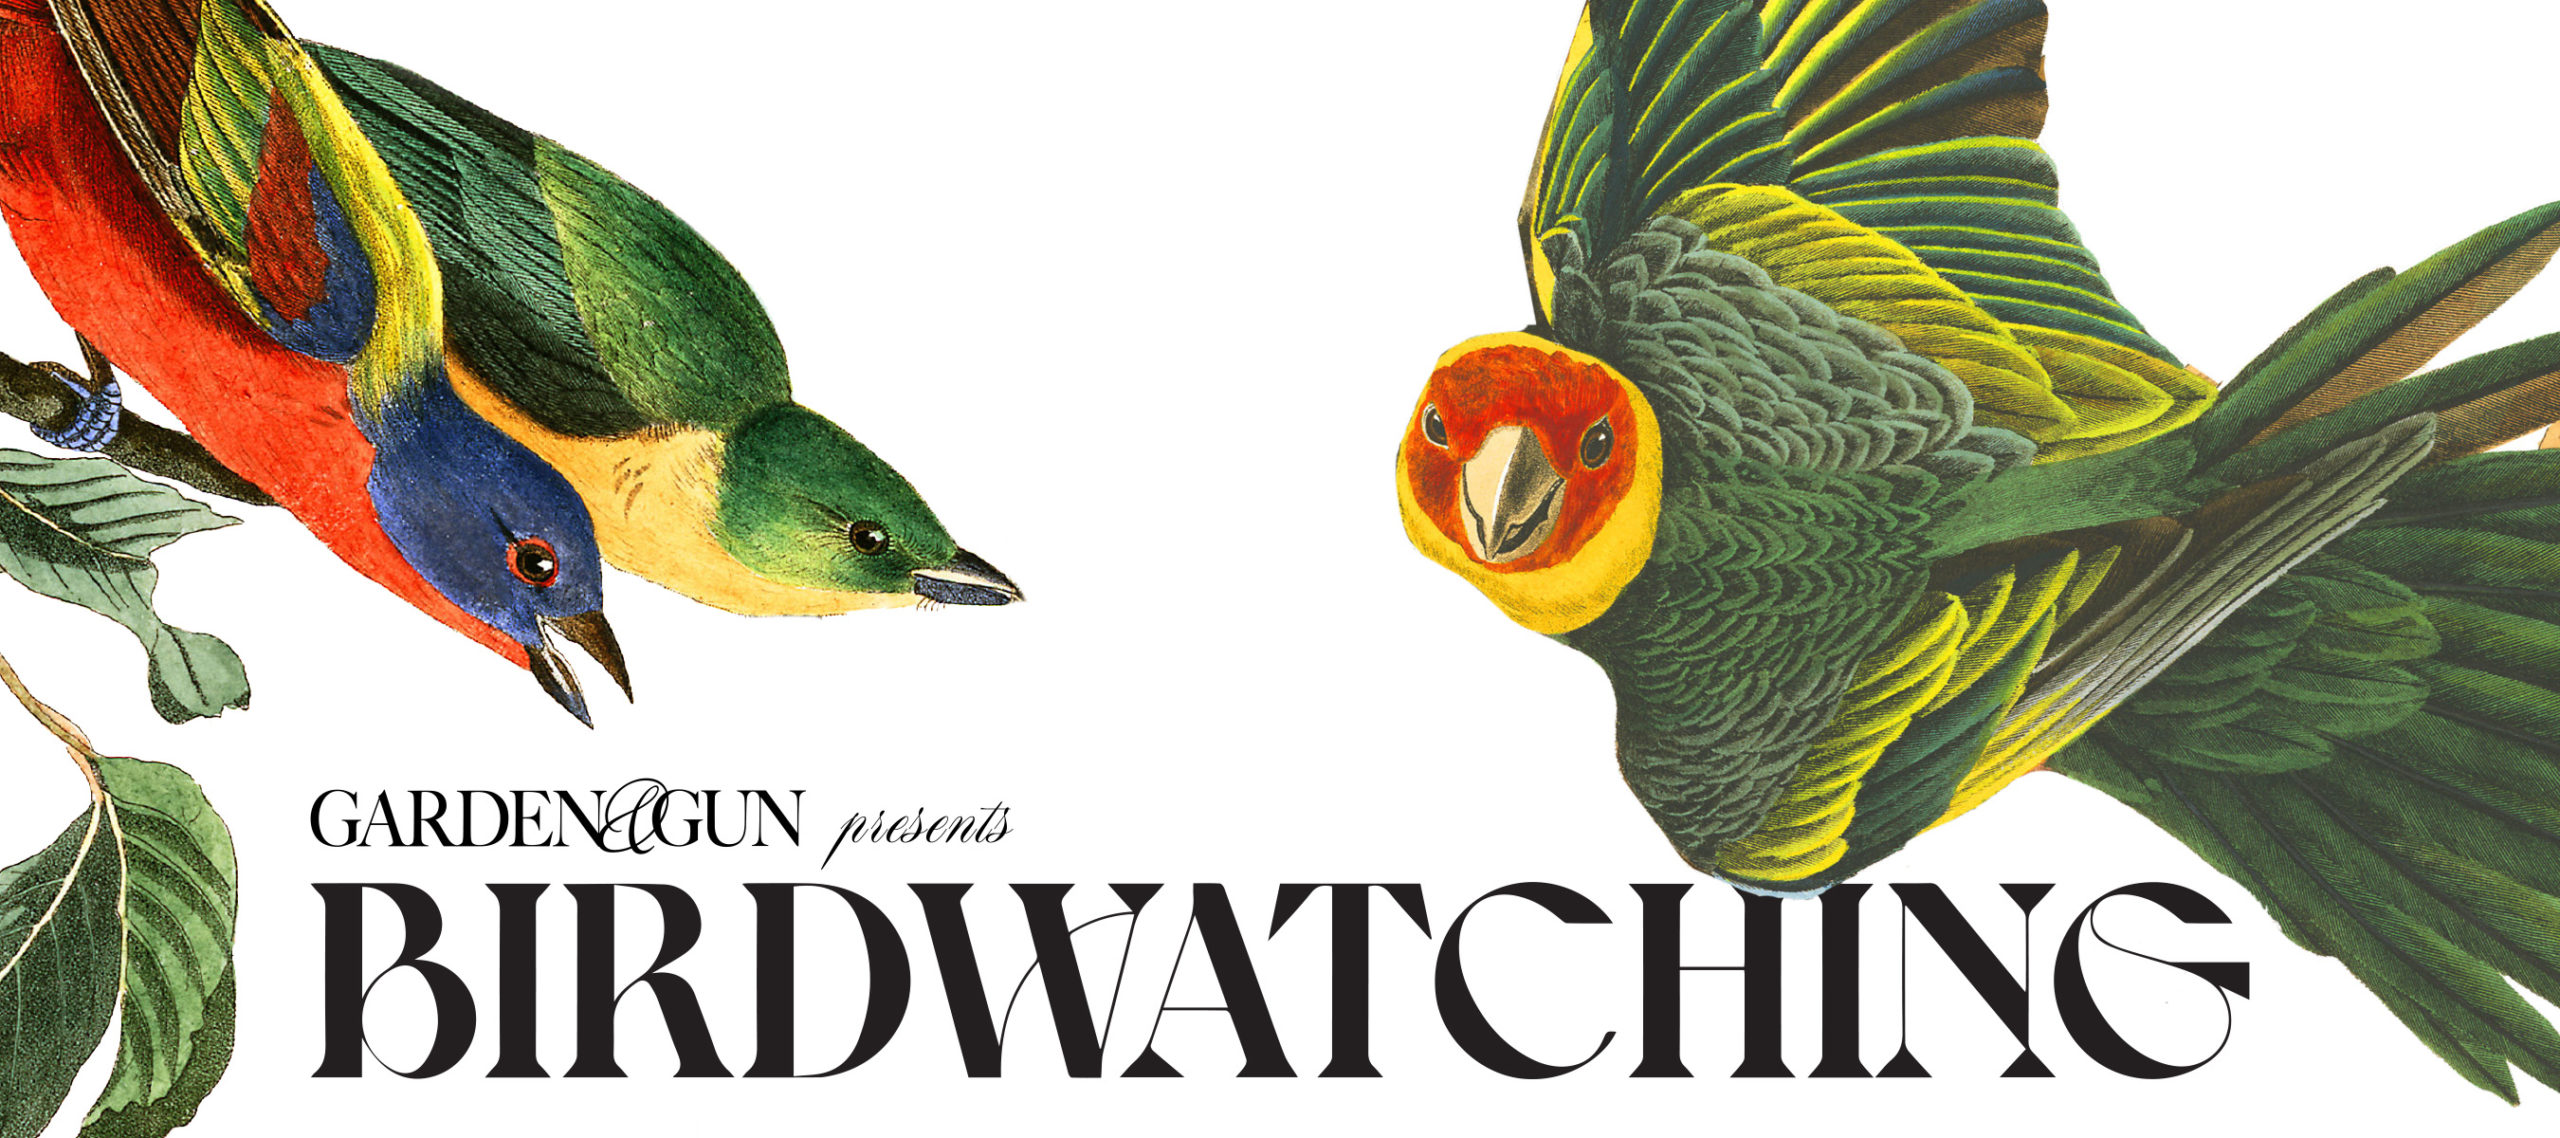 BIRDWATCHING on view at the Joseph Manigault House